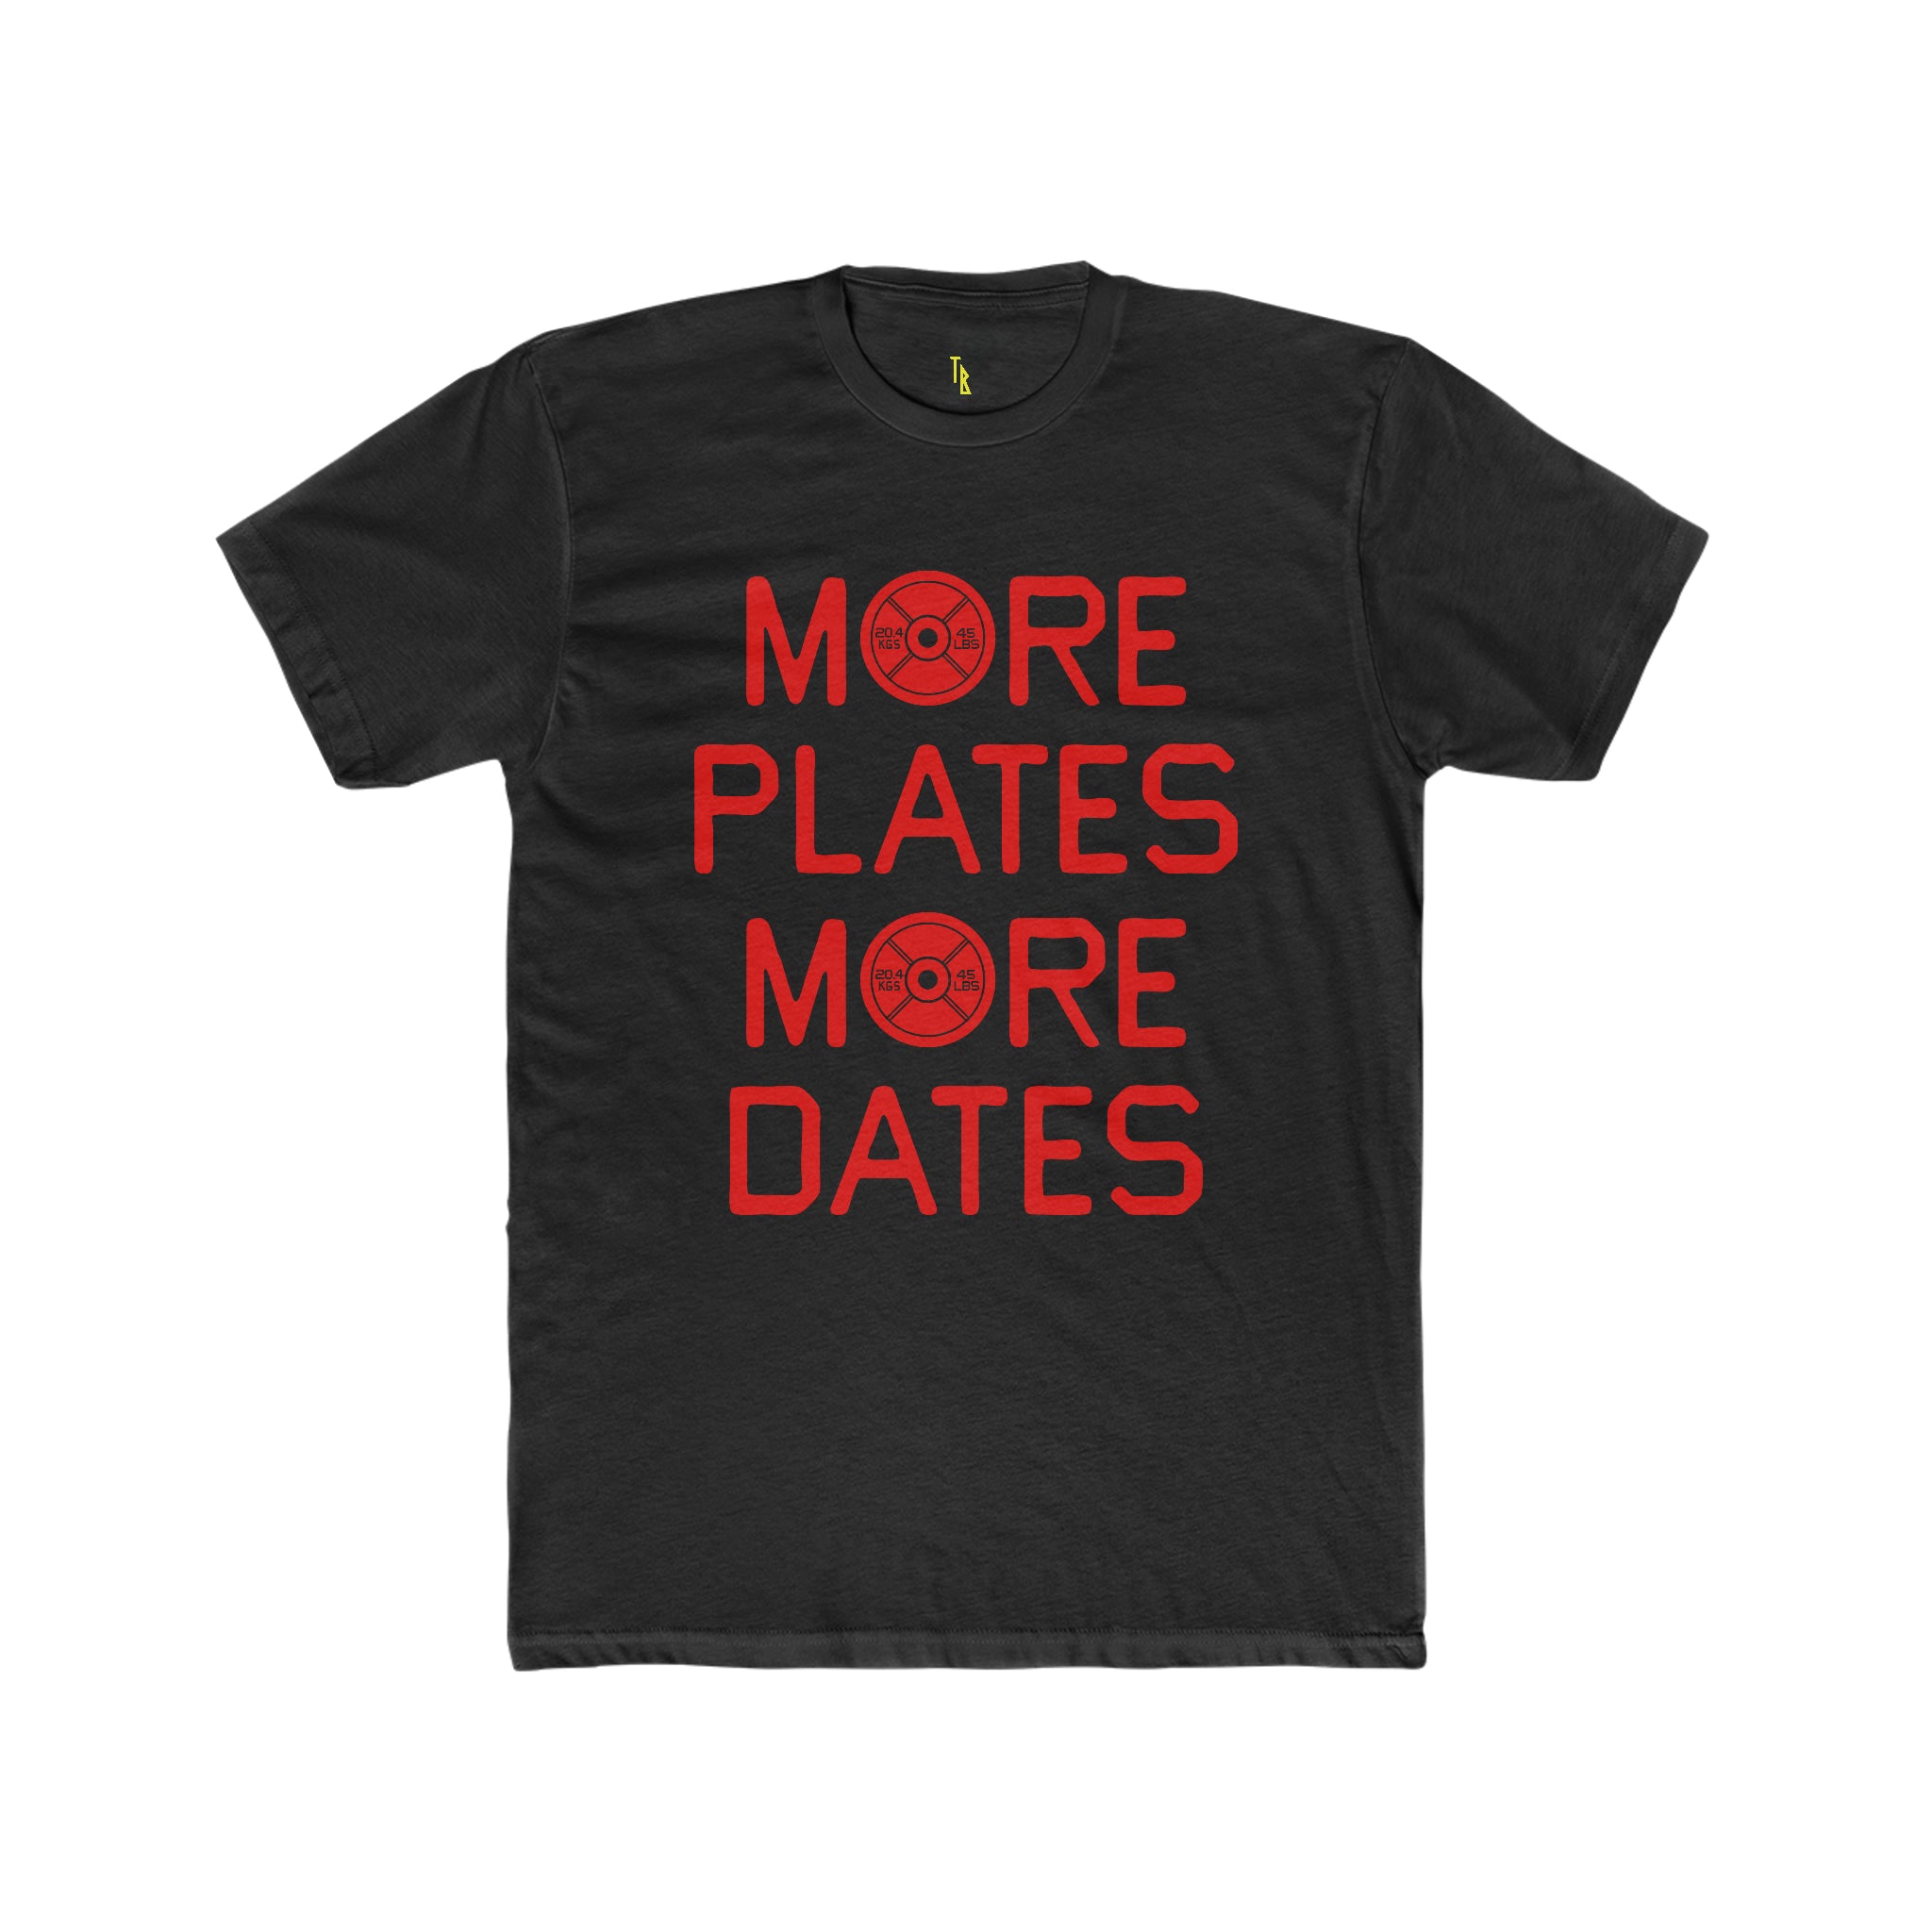 MORE PLATES MORE DATES T-SHIRT